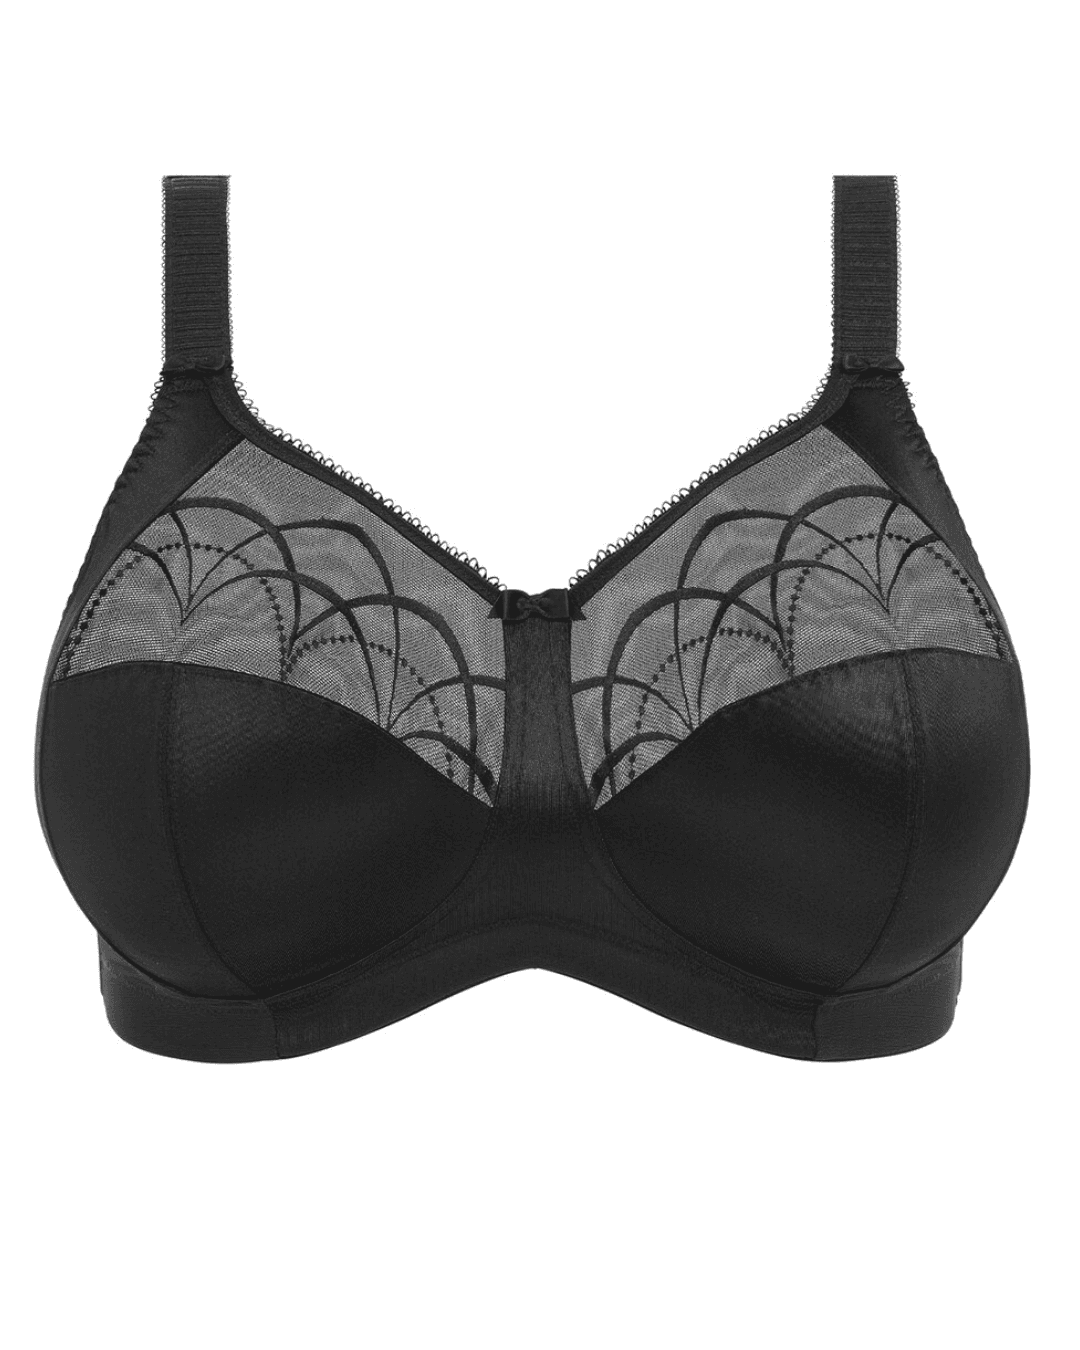 Elomi Women's Cate Full Cup Banded Bra: Comfort, Support, & Elegance. Soft  Satin Cups, Sheer Embroidery. DD+ Bras